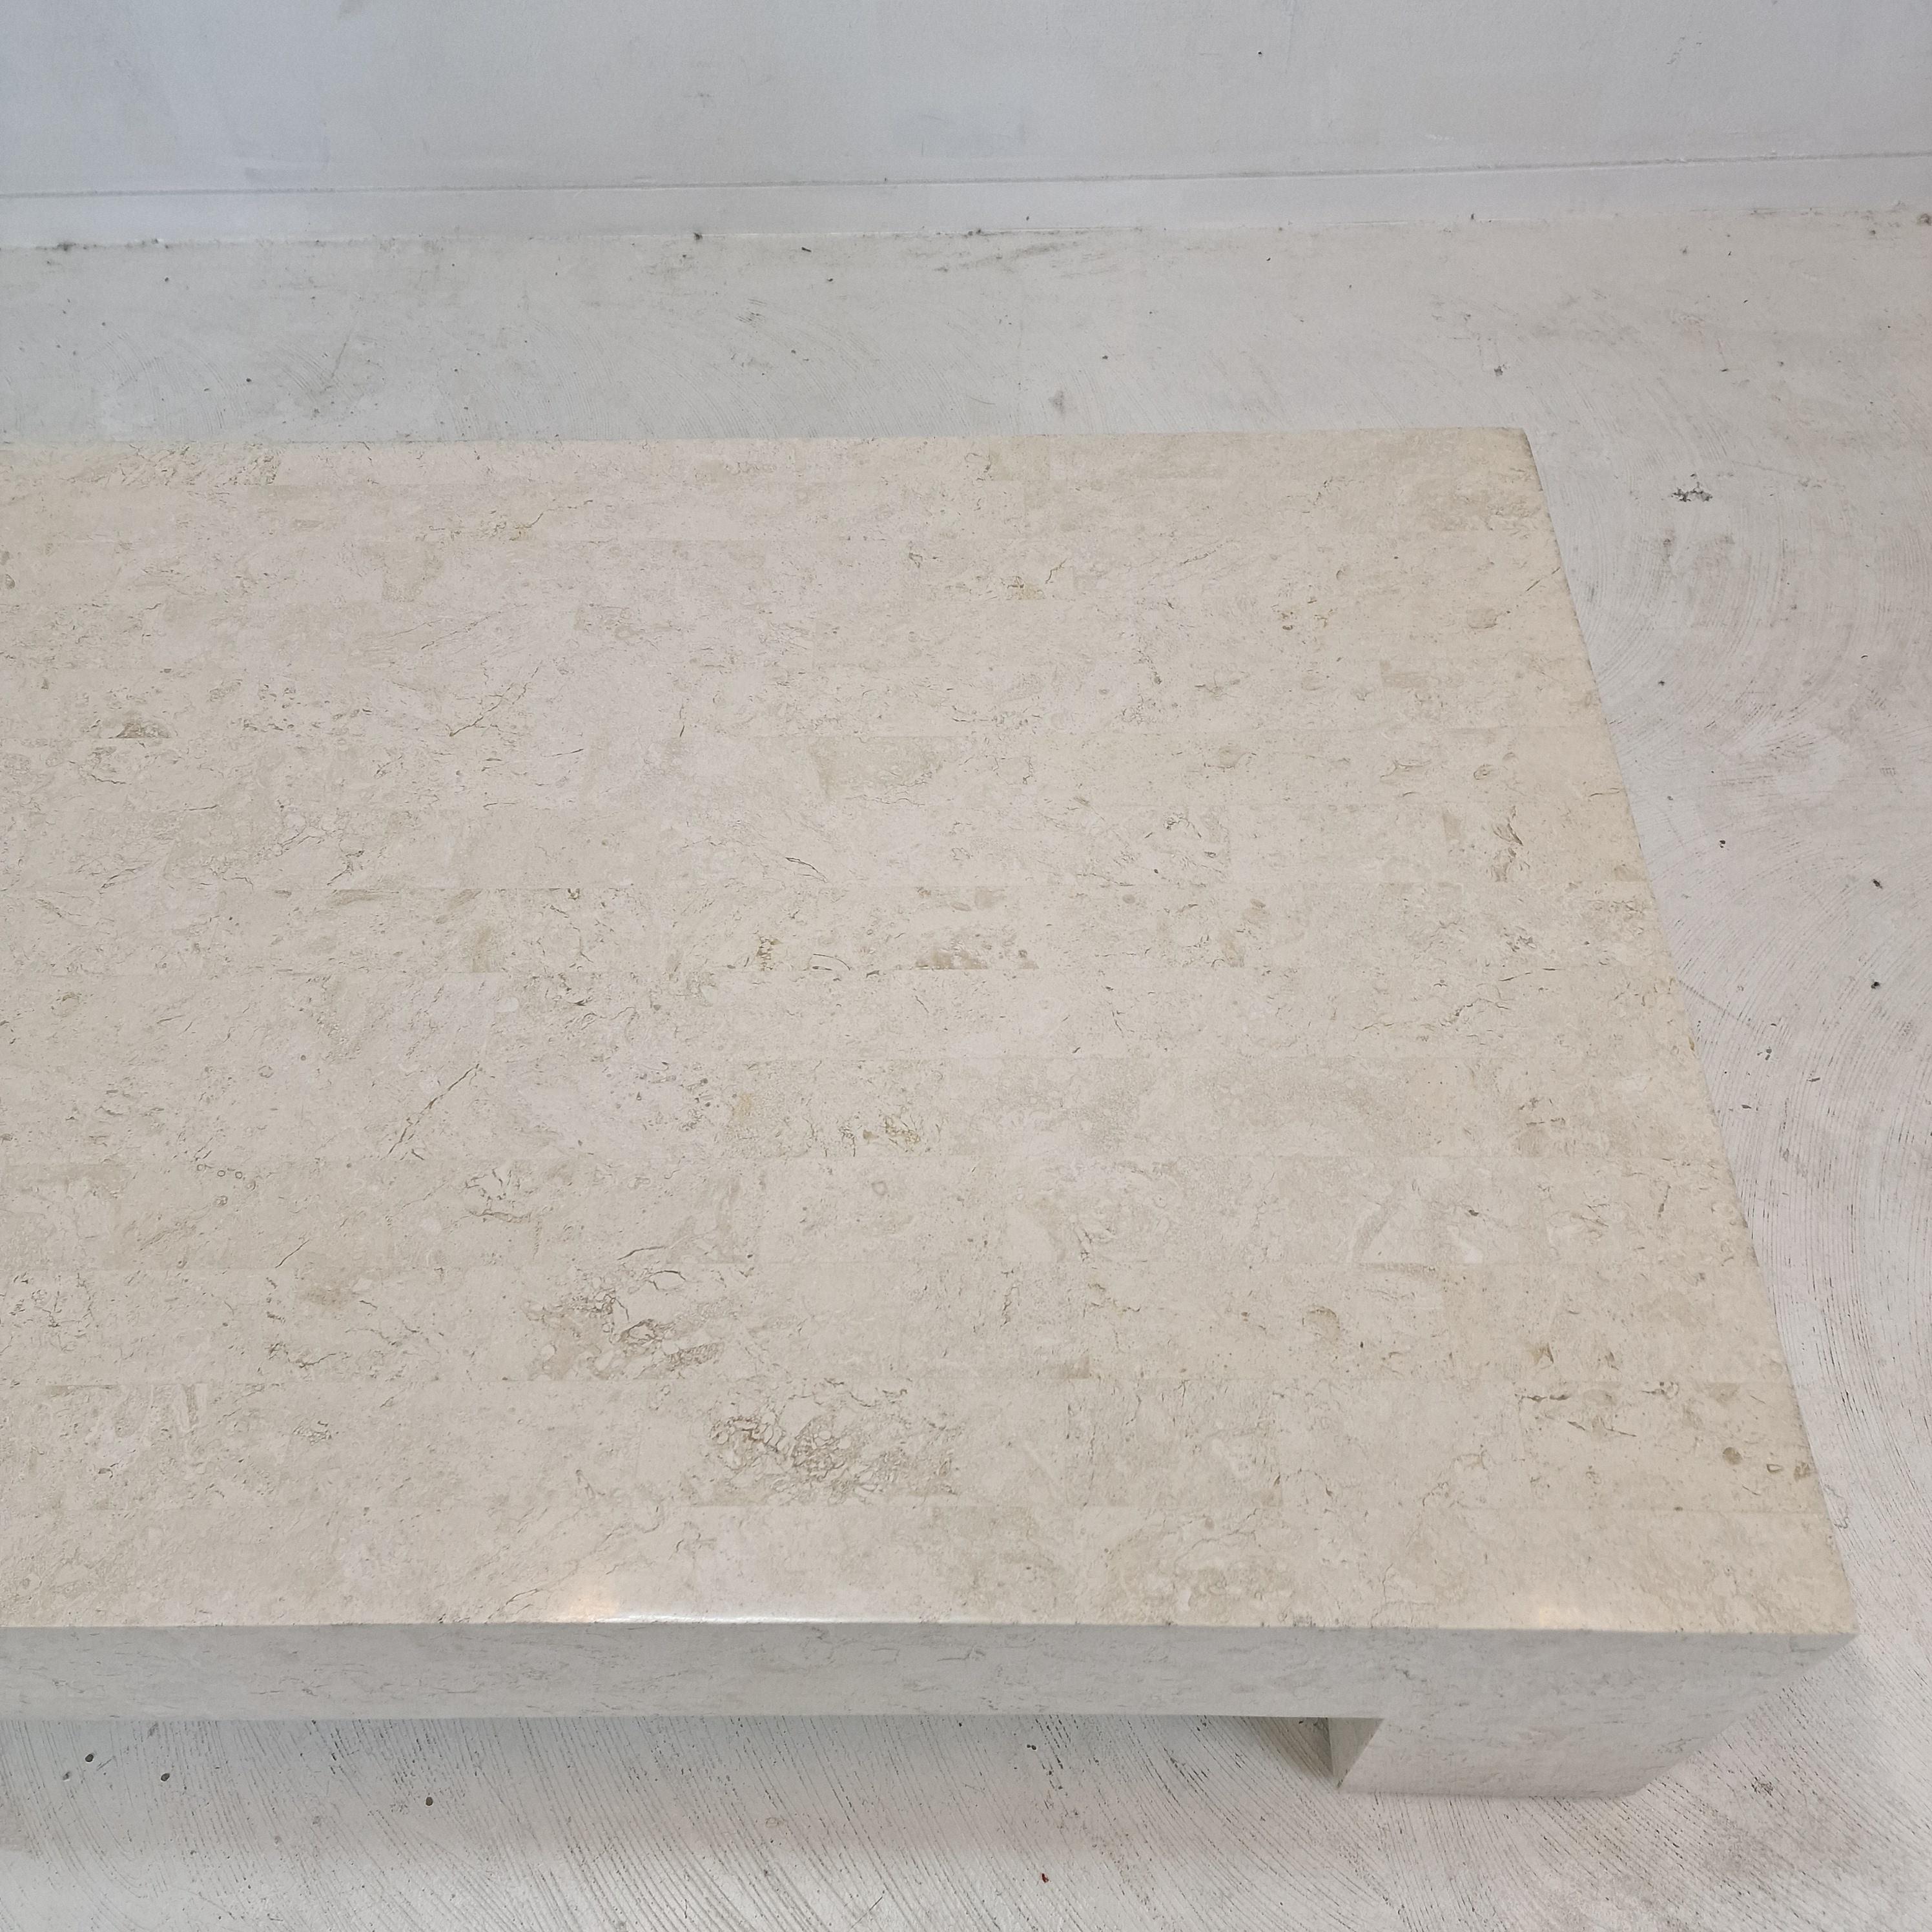 Magnussen Ponte Mactan Stone or Fossil Stone Coffee Table, 1980s For Sale 5